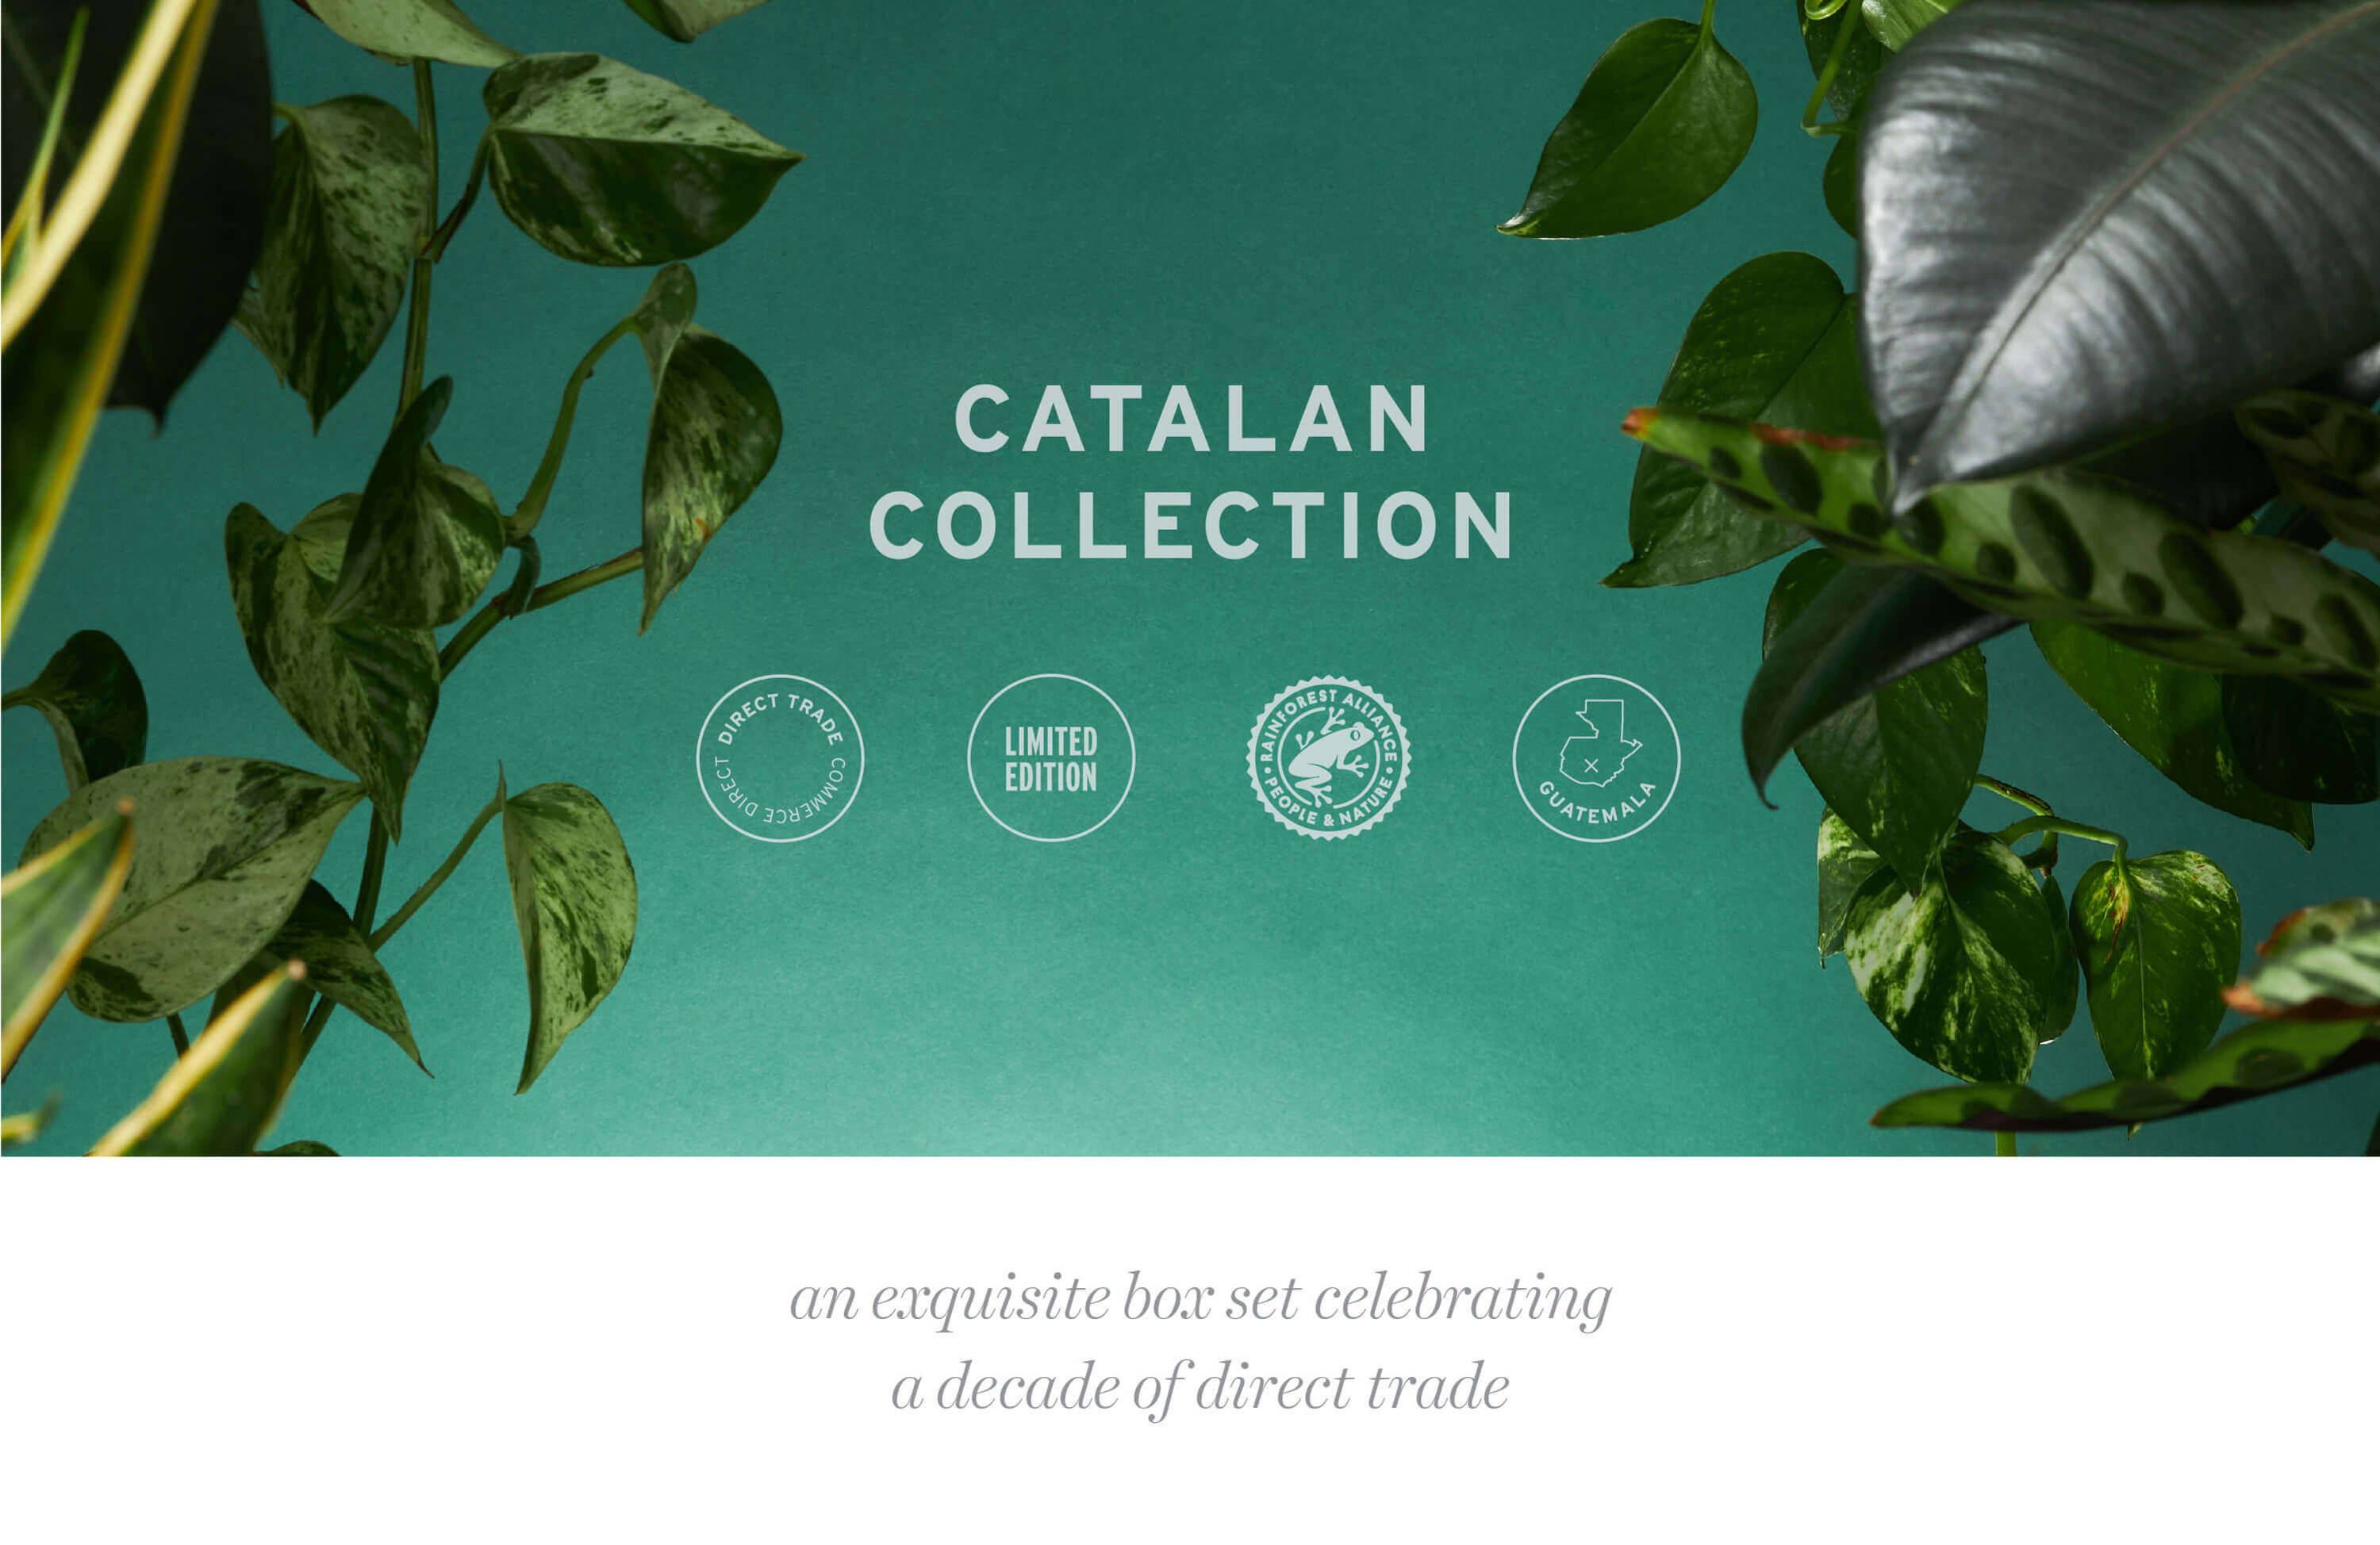 Catalan Collection. An exquisite box set celebrating a decade of direct trade. 